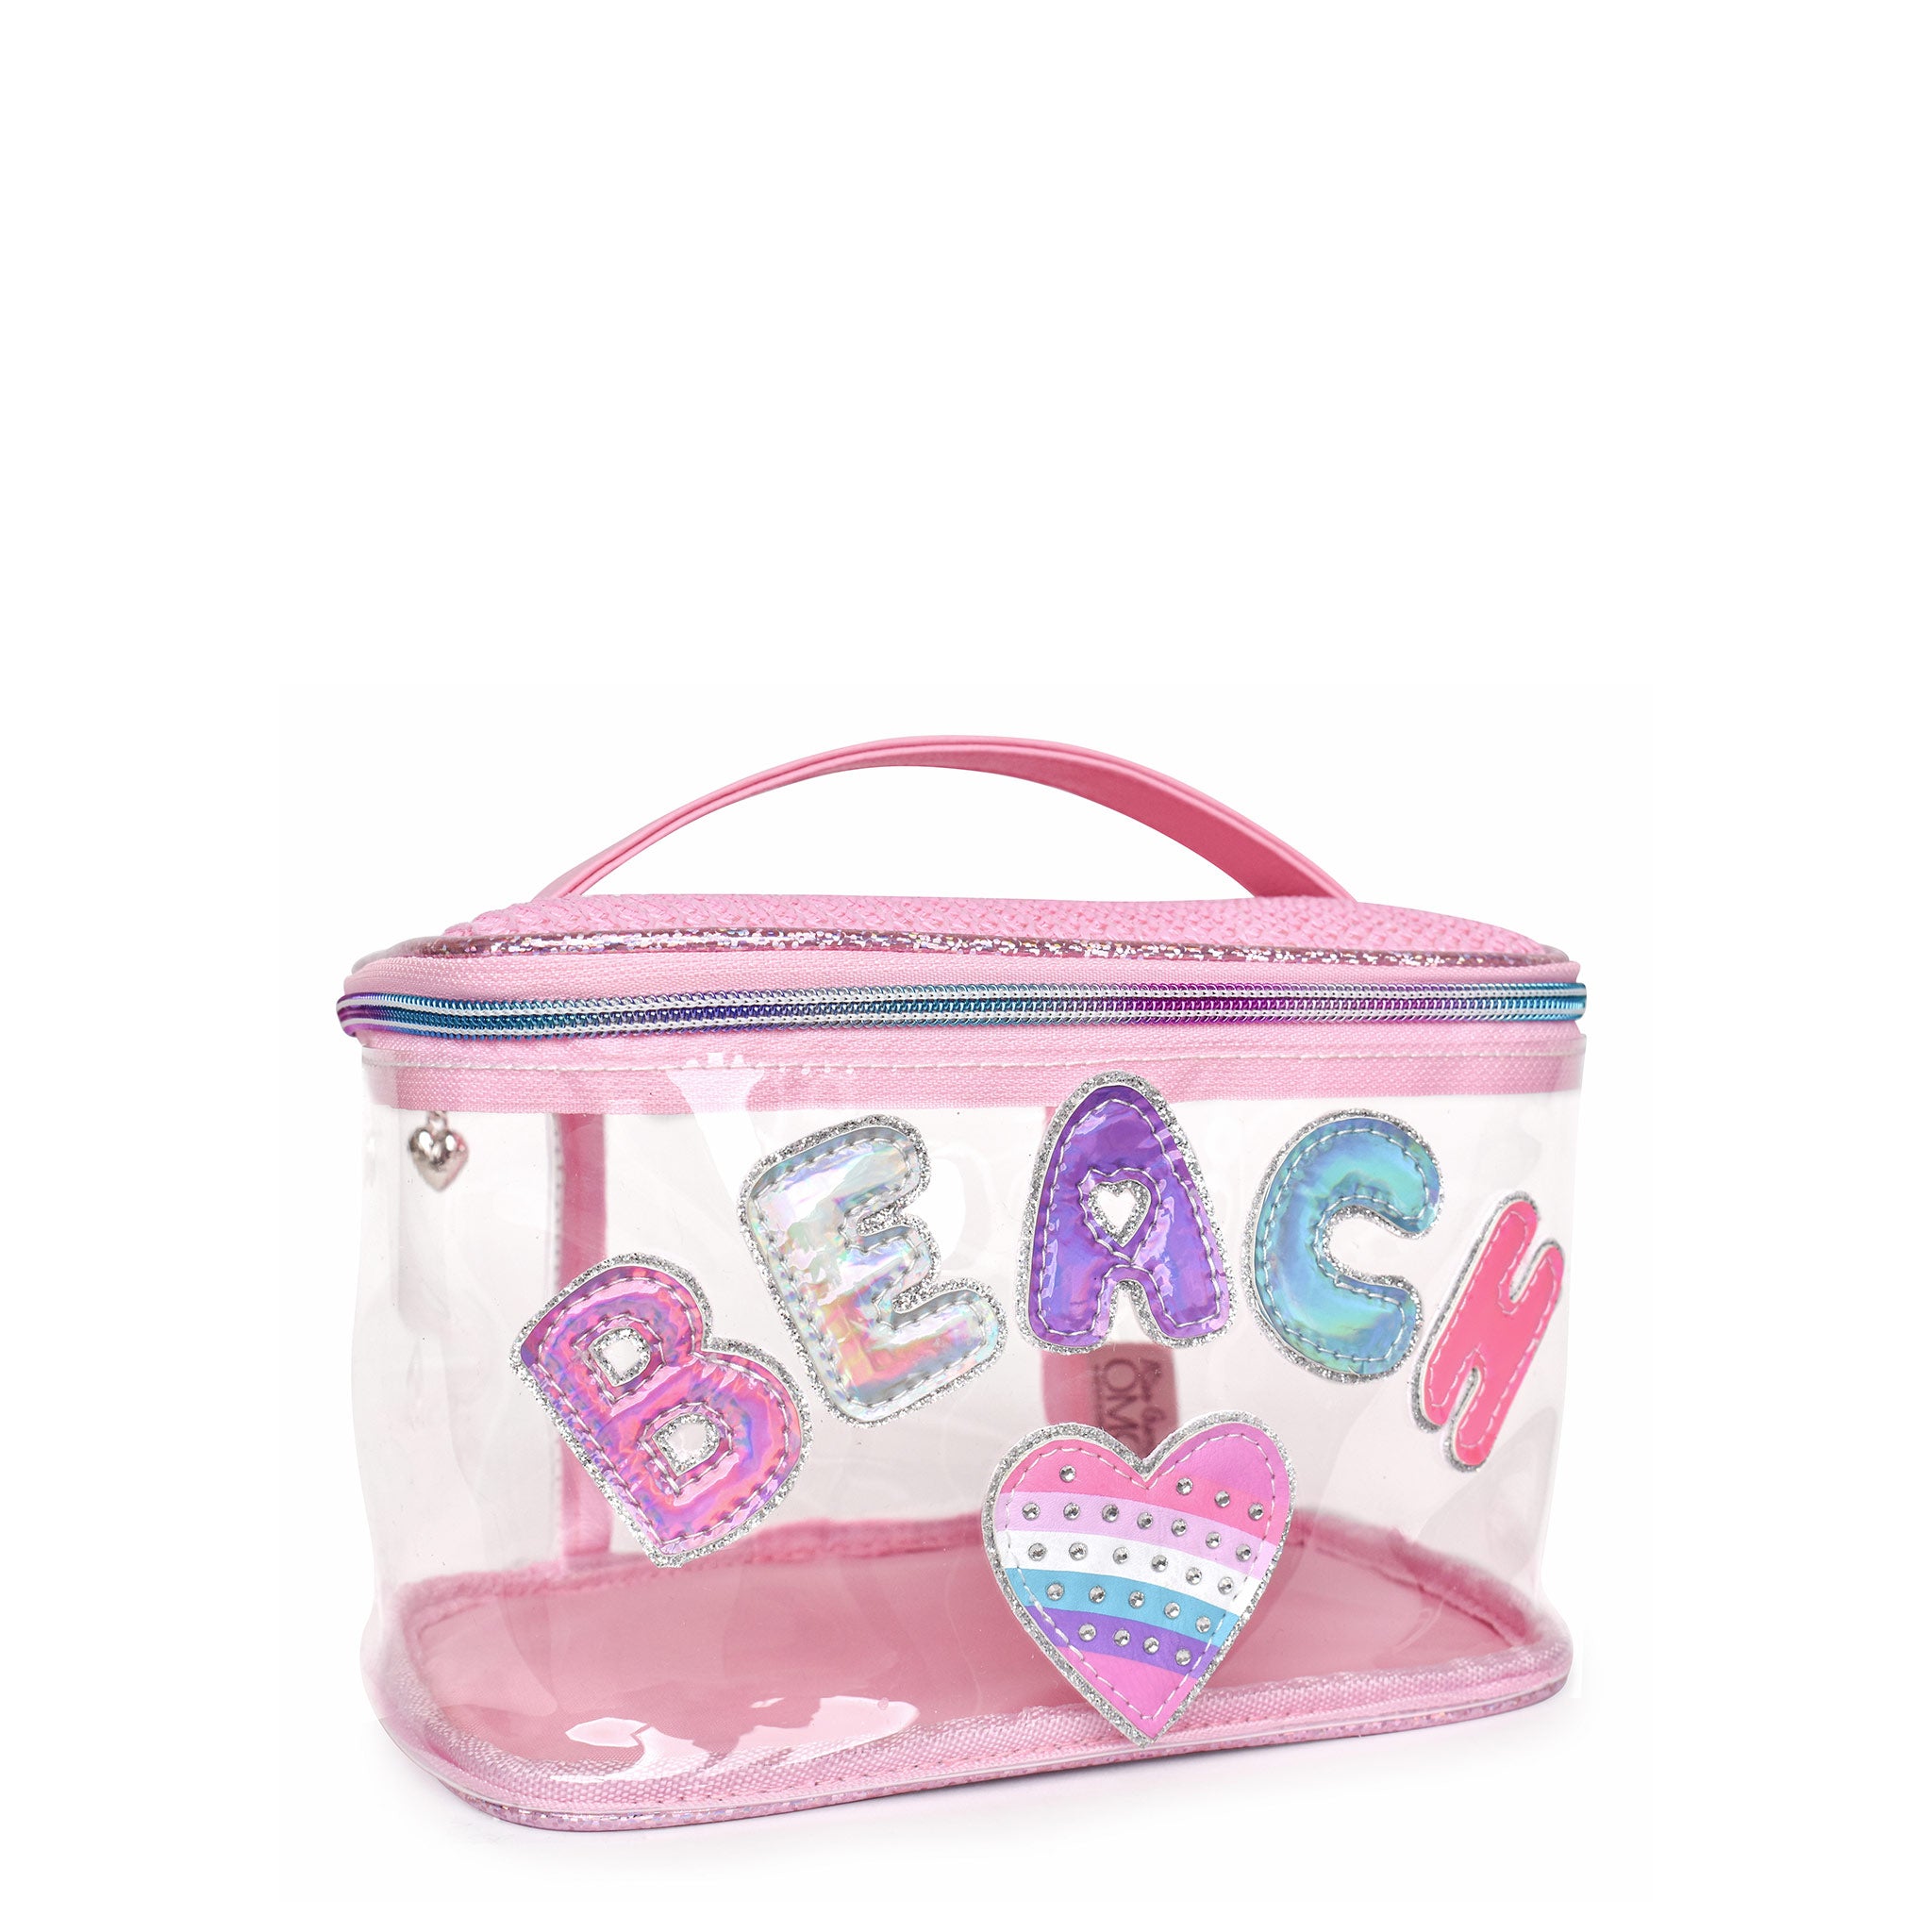 Side view of a clear train case with metallic bubble letters 'BEACH' and a rhinestone and striped heart patch